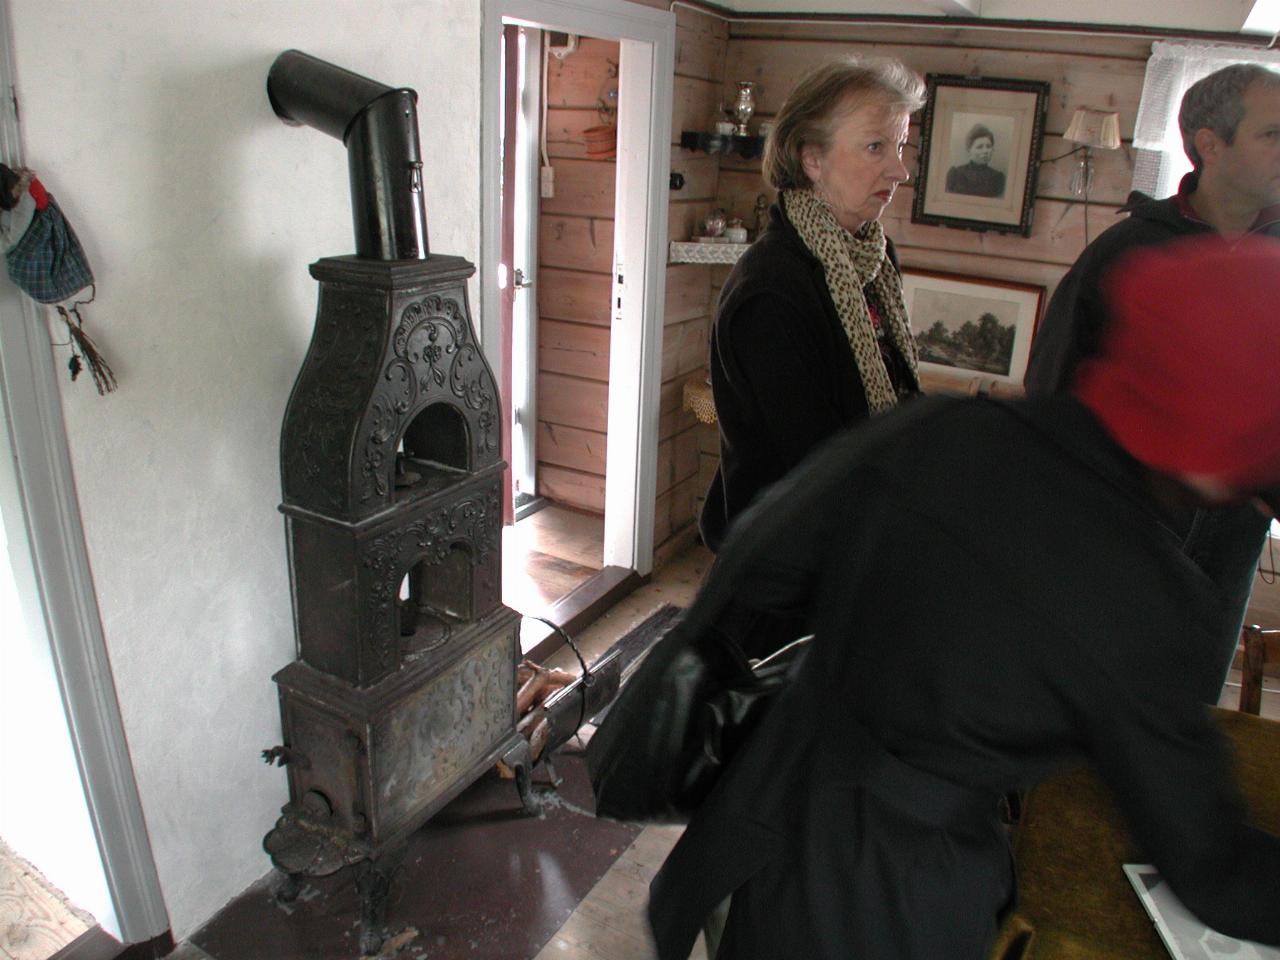 KPLU Viking Jazz: Old stove for heating living room in old home from Molde now in Romsdalmuseet